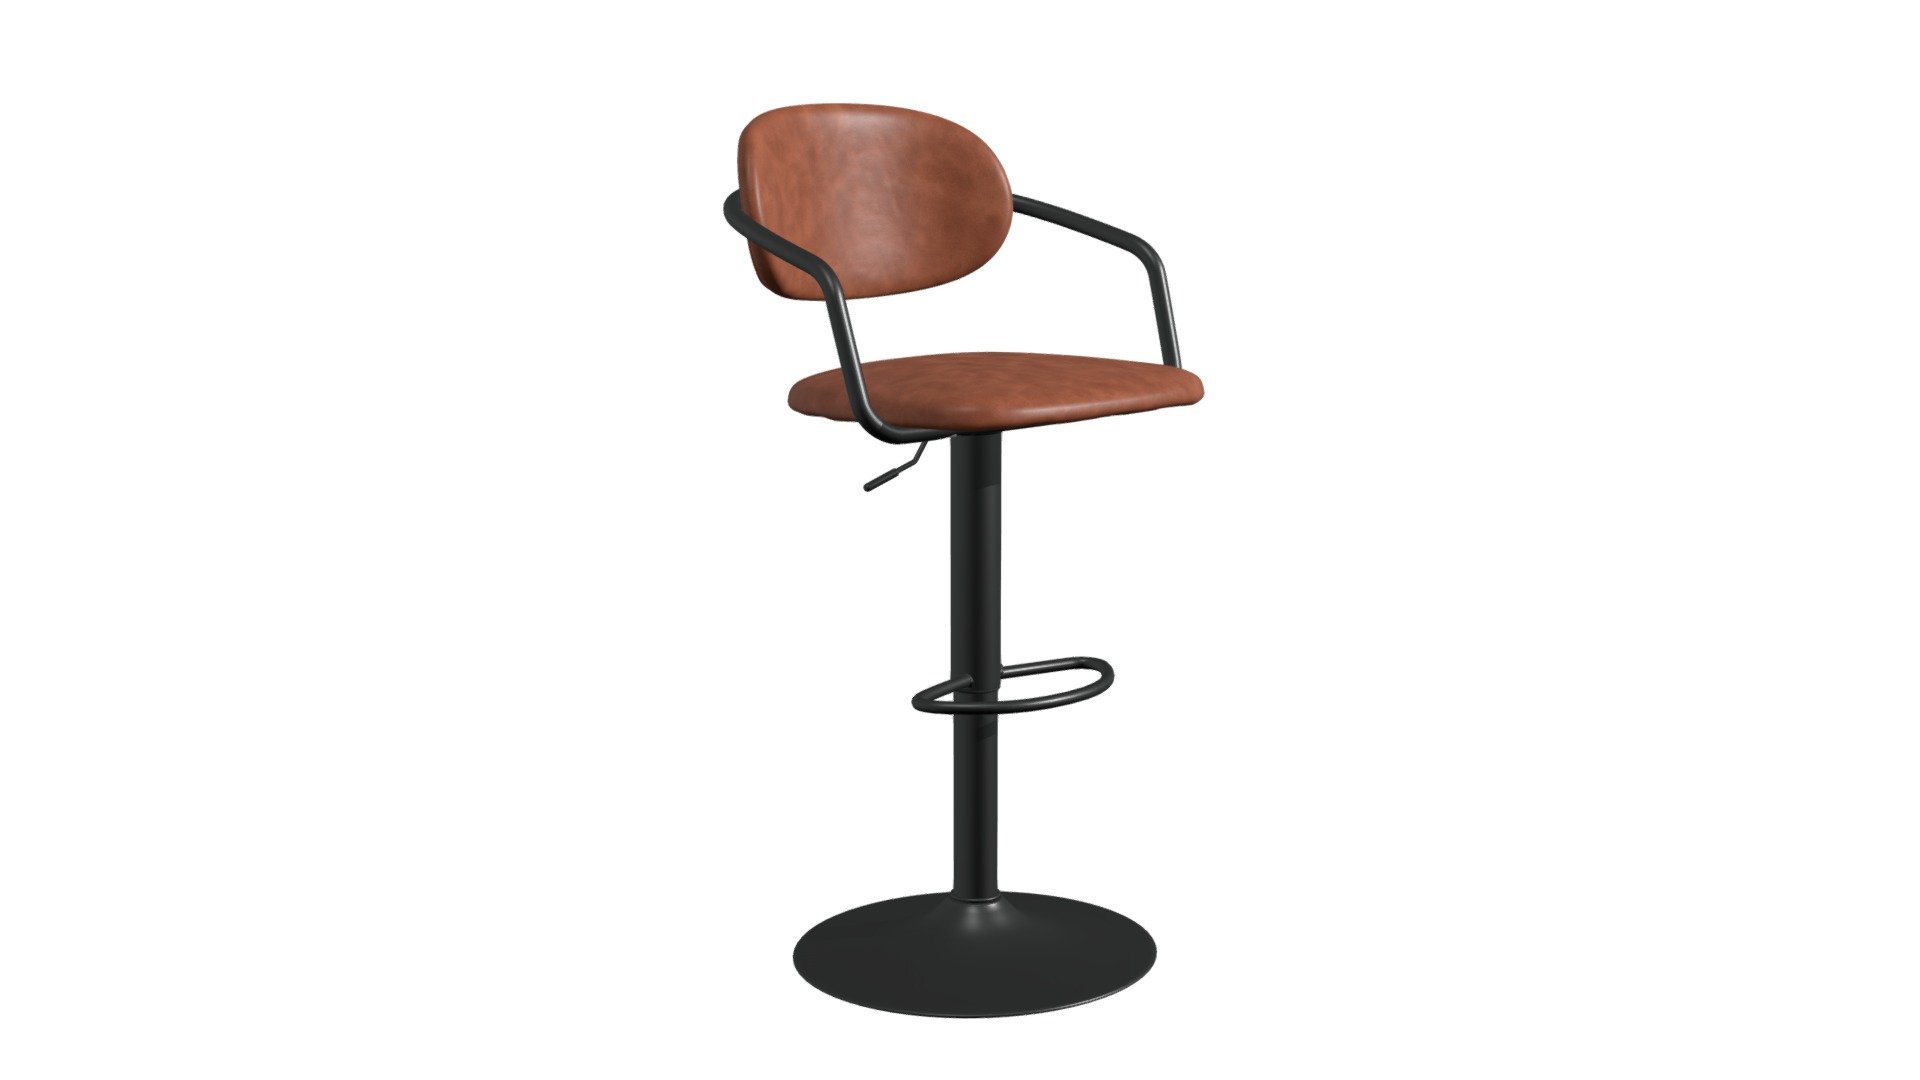 https://zuomod.com/kirby-bar-chair-vintage-brown
Modern in shape and adjustablity, the Kirby Bar Chair is wrapped in vinyl on an adjustble height base in powdercoated steel. This stool looks great in any kitchen, hotel bar, or restaurant 3d model